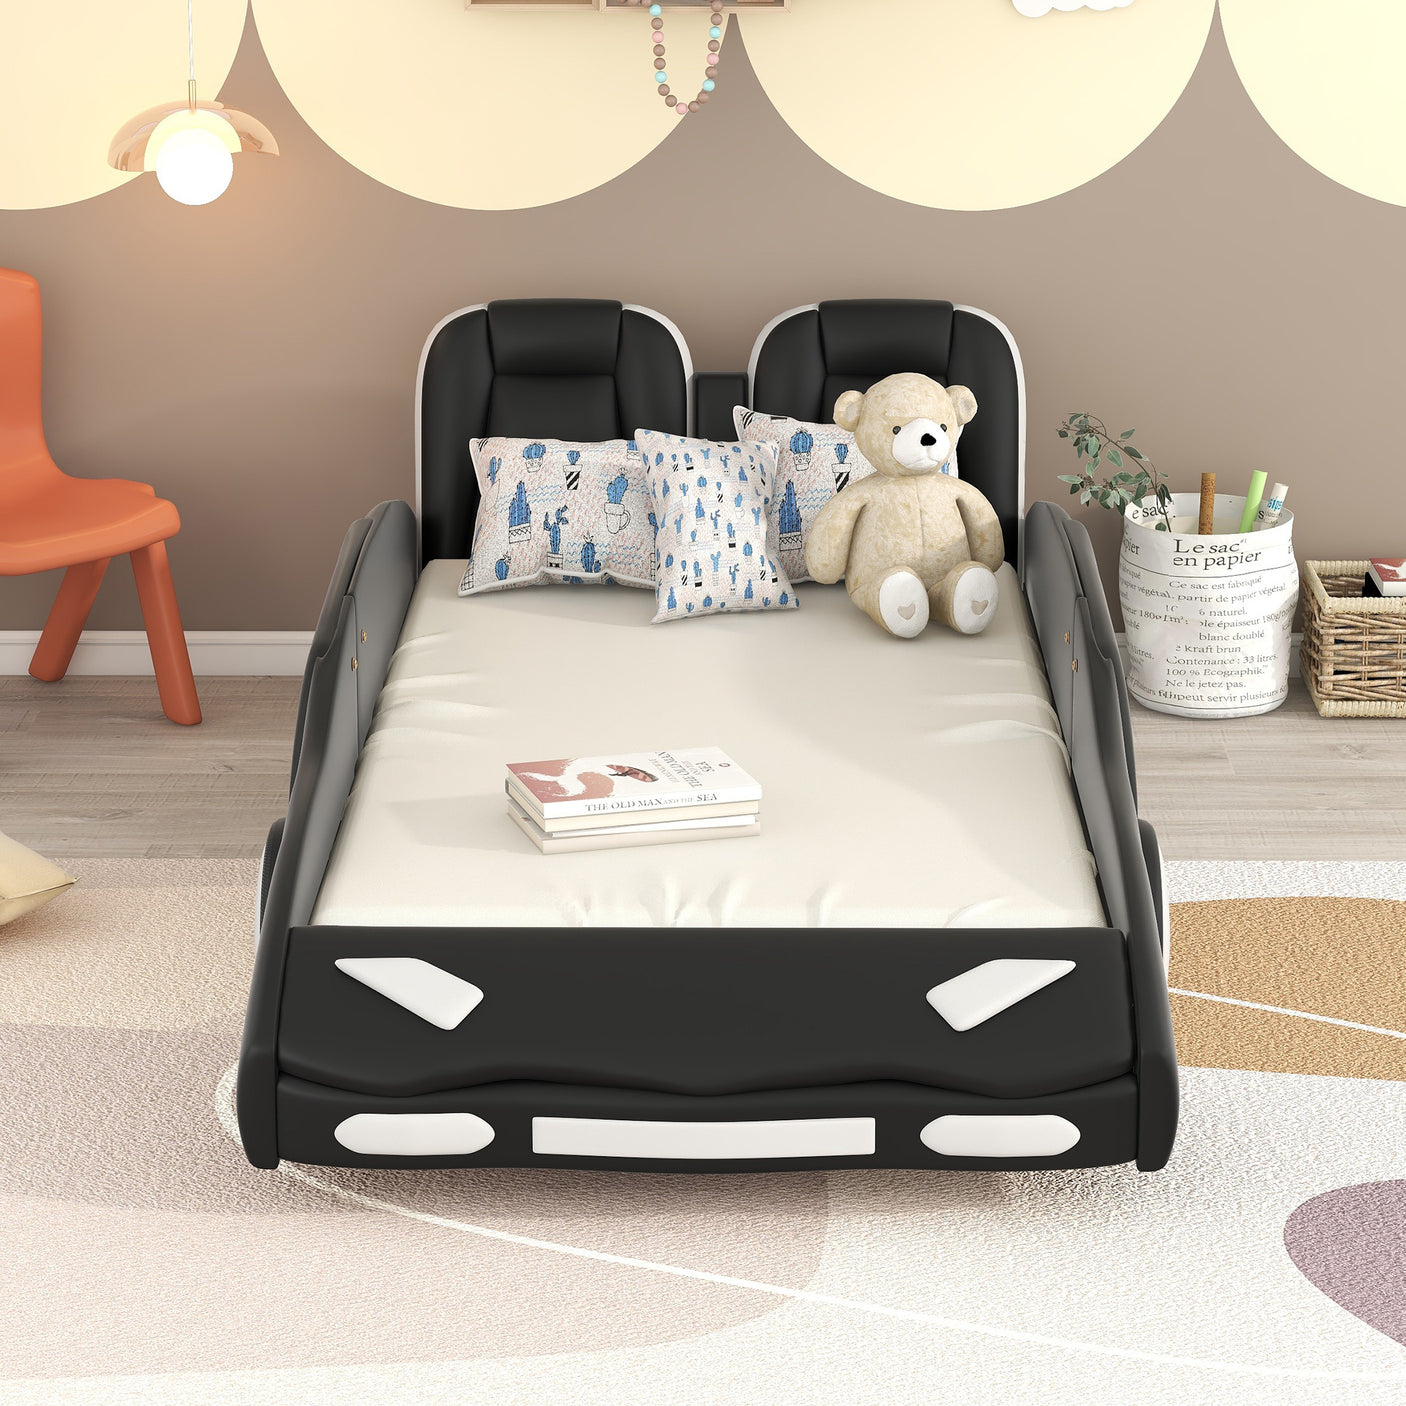 Twin Size Race Car-Shaped Platform Bed with Wheels, Black - Home Elegance USA